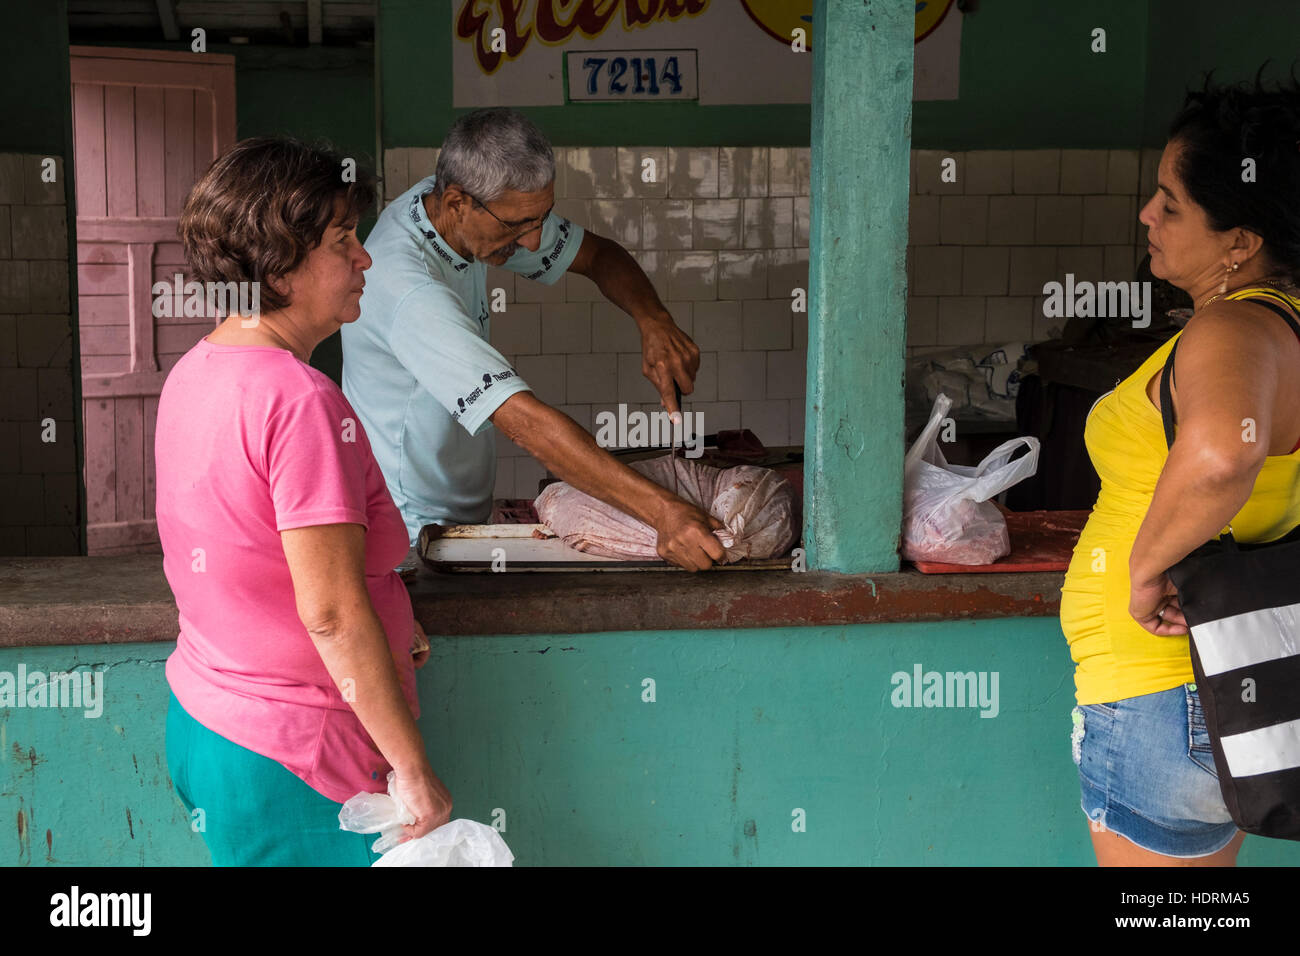 Women chatting while butcher opens bag of meat at ration shop in Vinales, Cuba Stock Photo